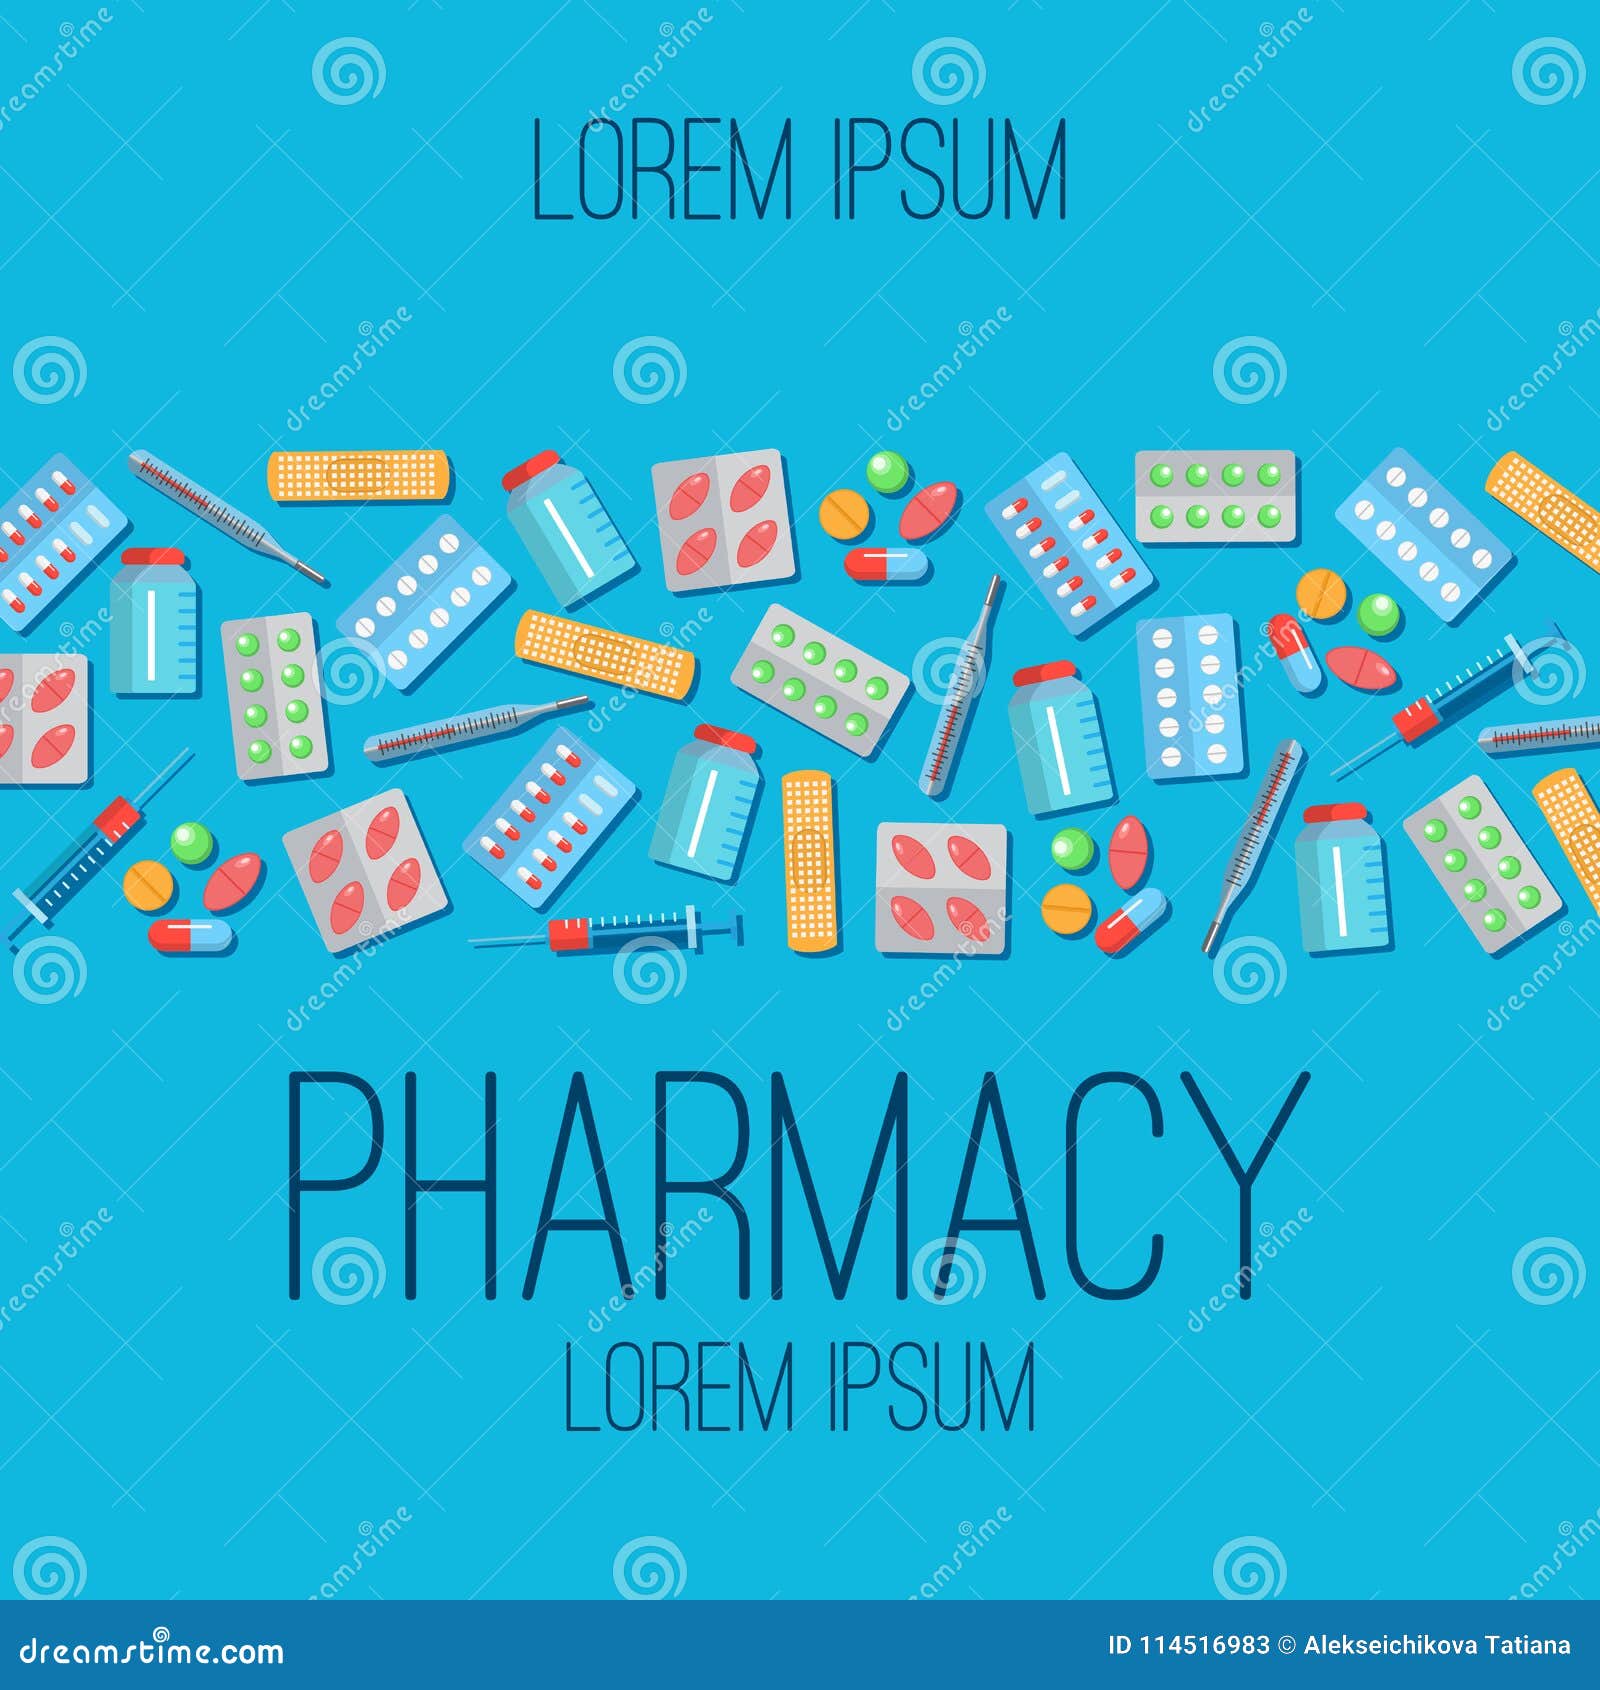 Pharmacy poster flat icons stock vector. Illustration of flat - 114516983